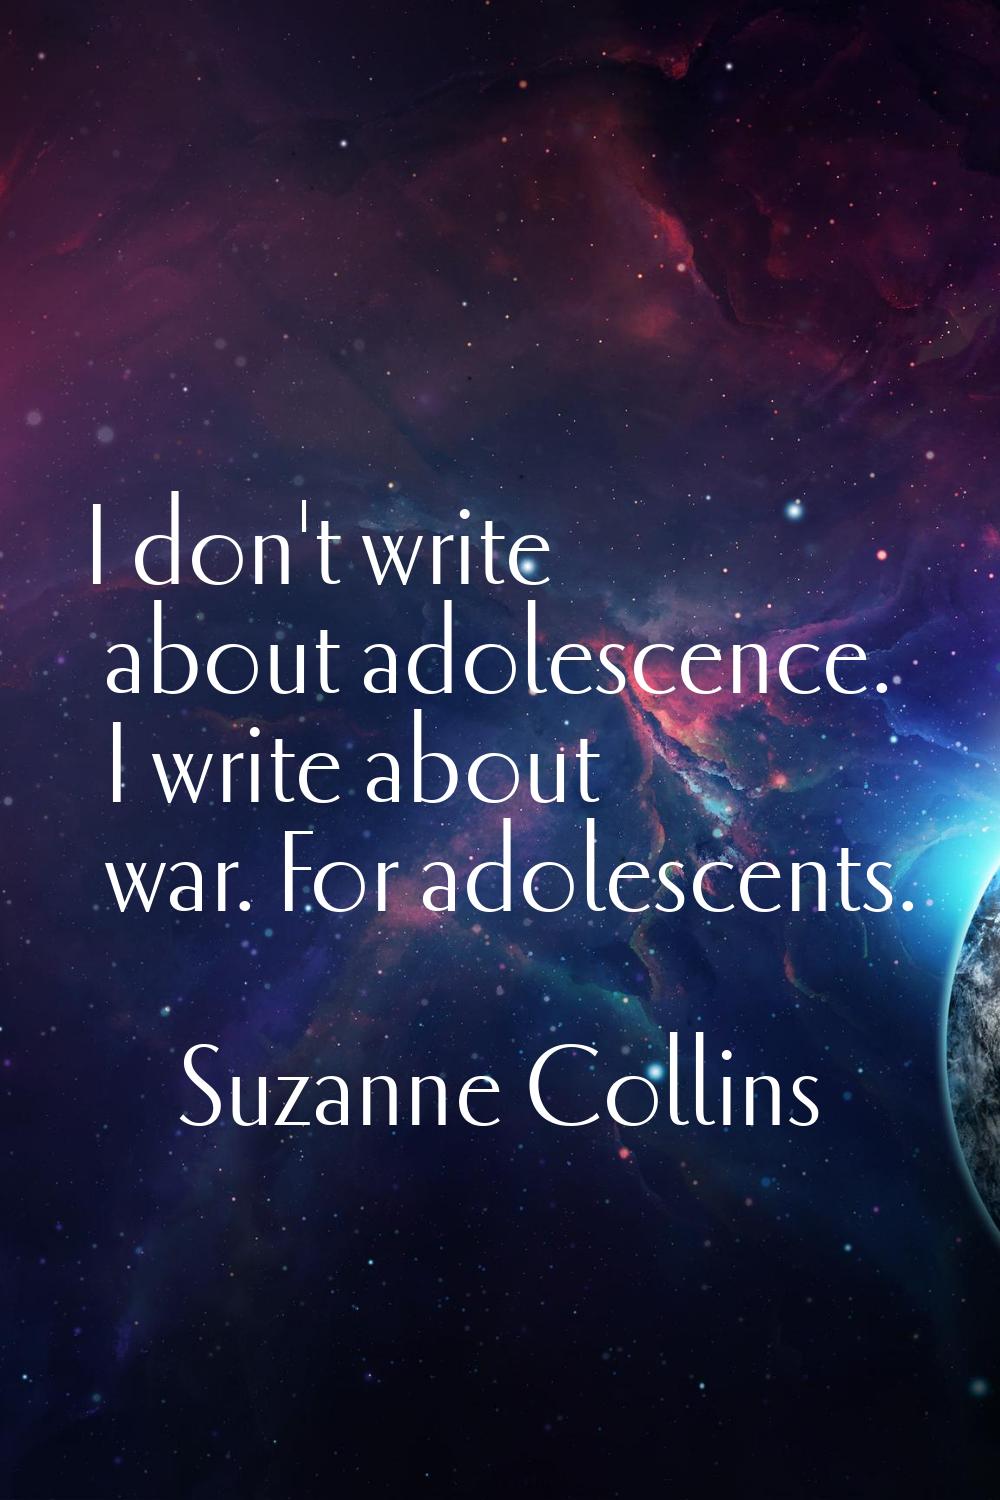 I don't write about adolescence. I write about war. For adolescents.